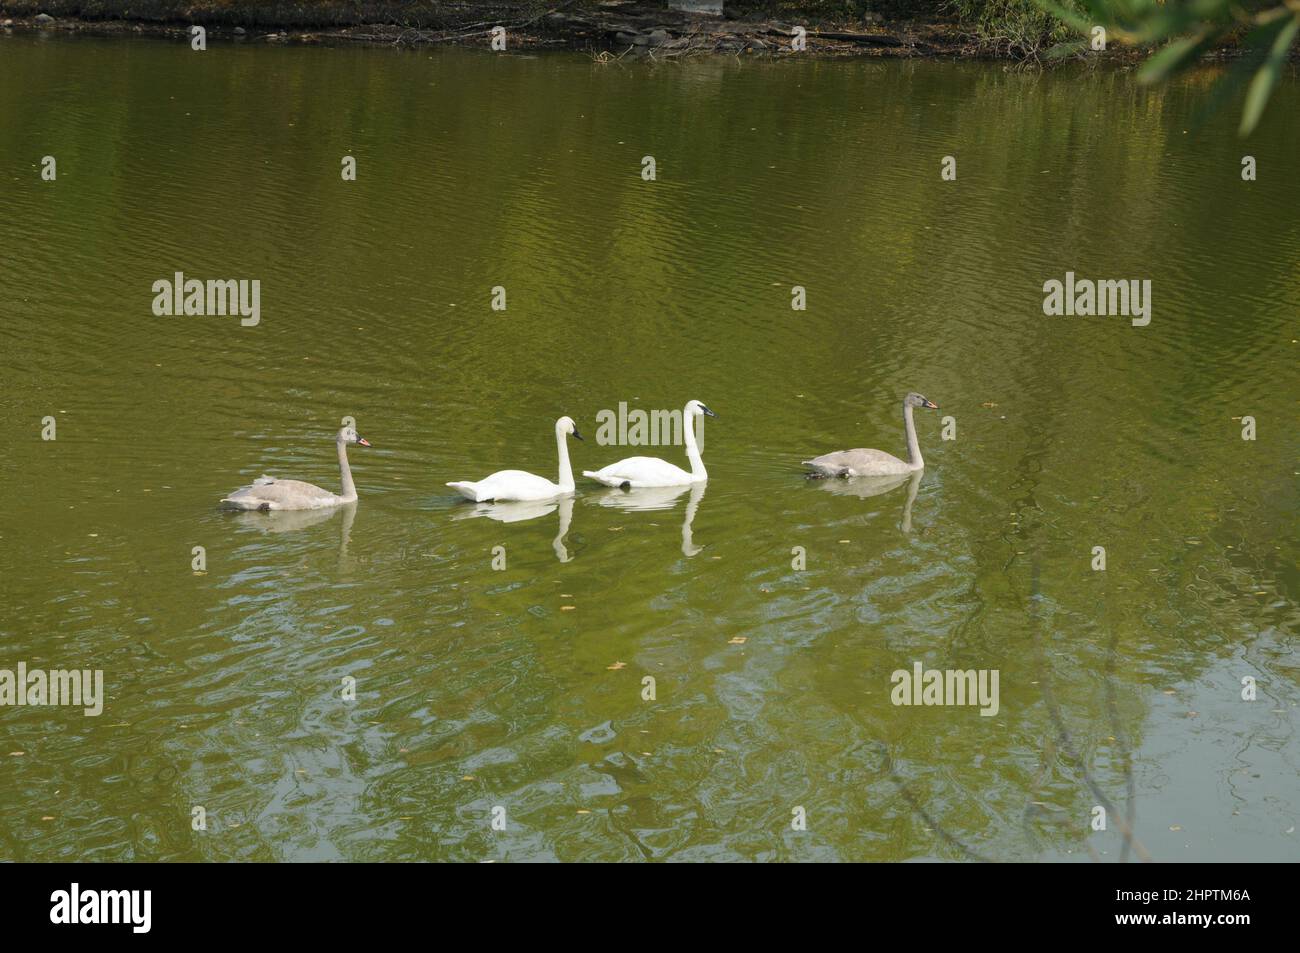 Swans, Tundra Swans, Swimming on a calm blue-green lake in Canada, North America Stock Photo